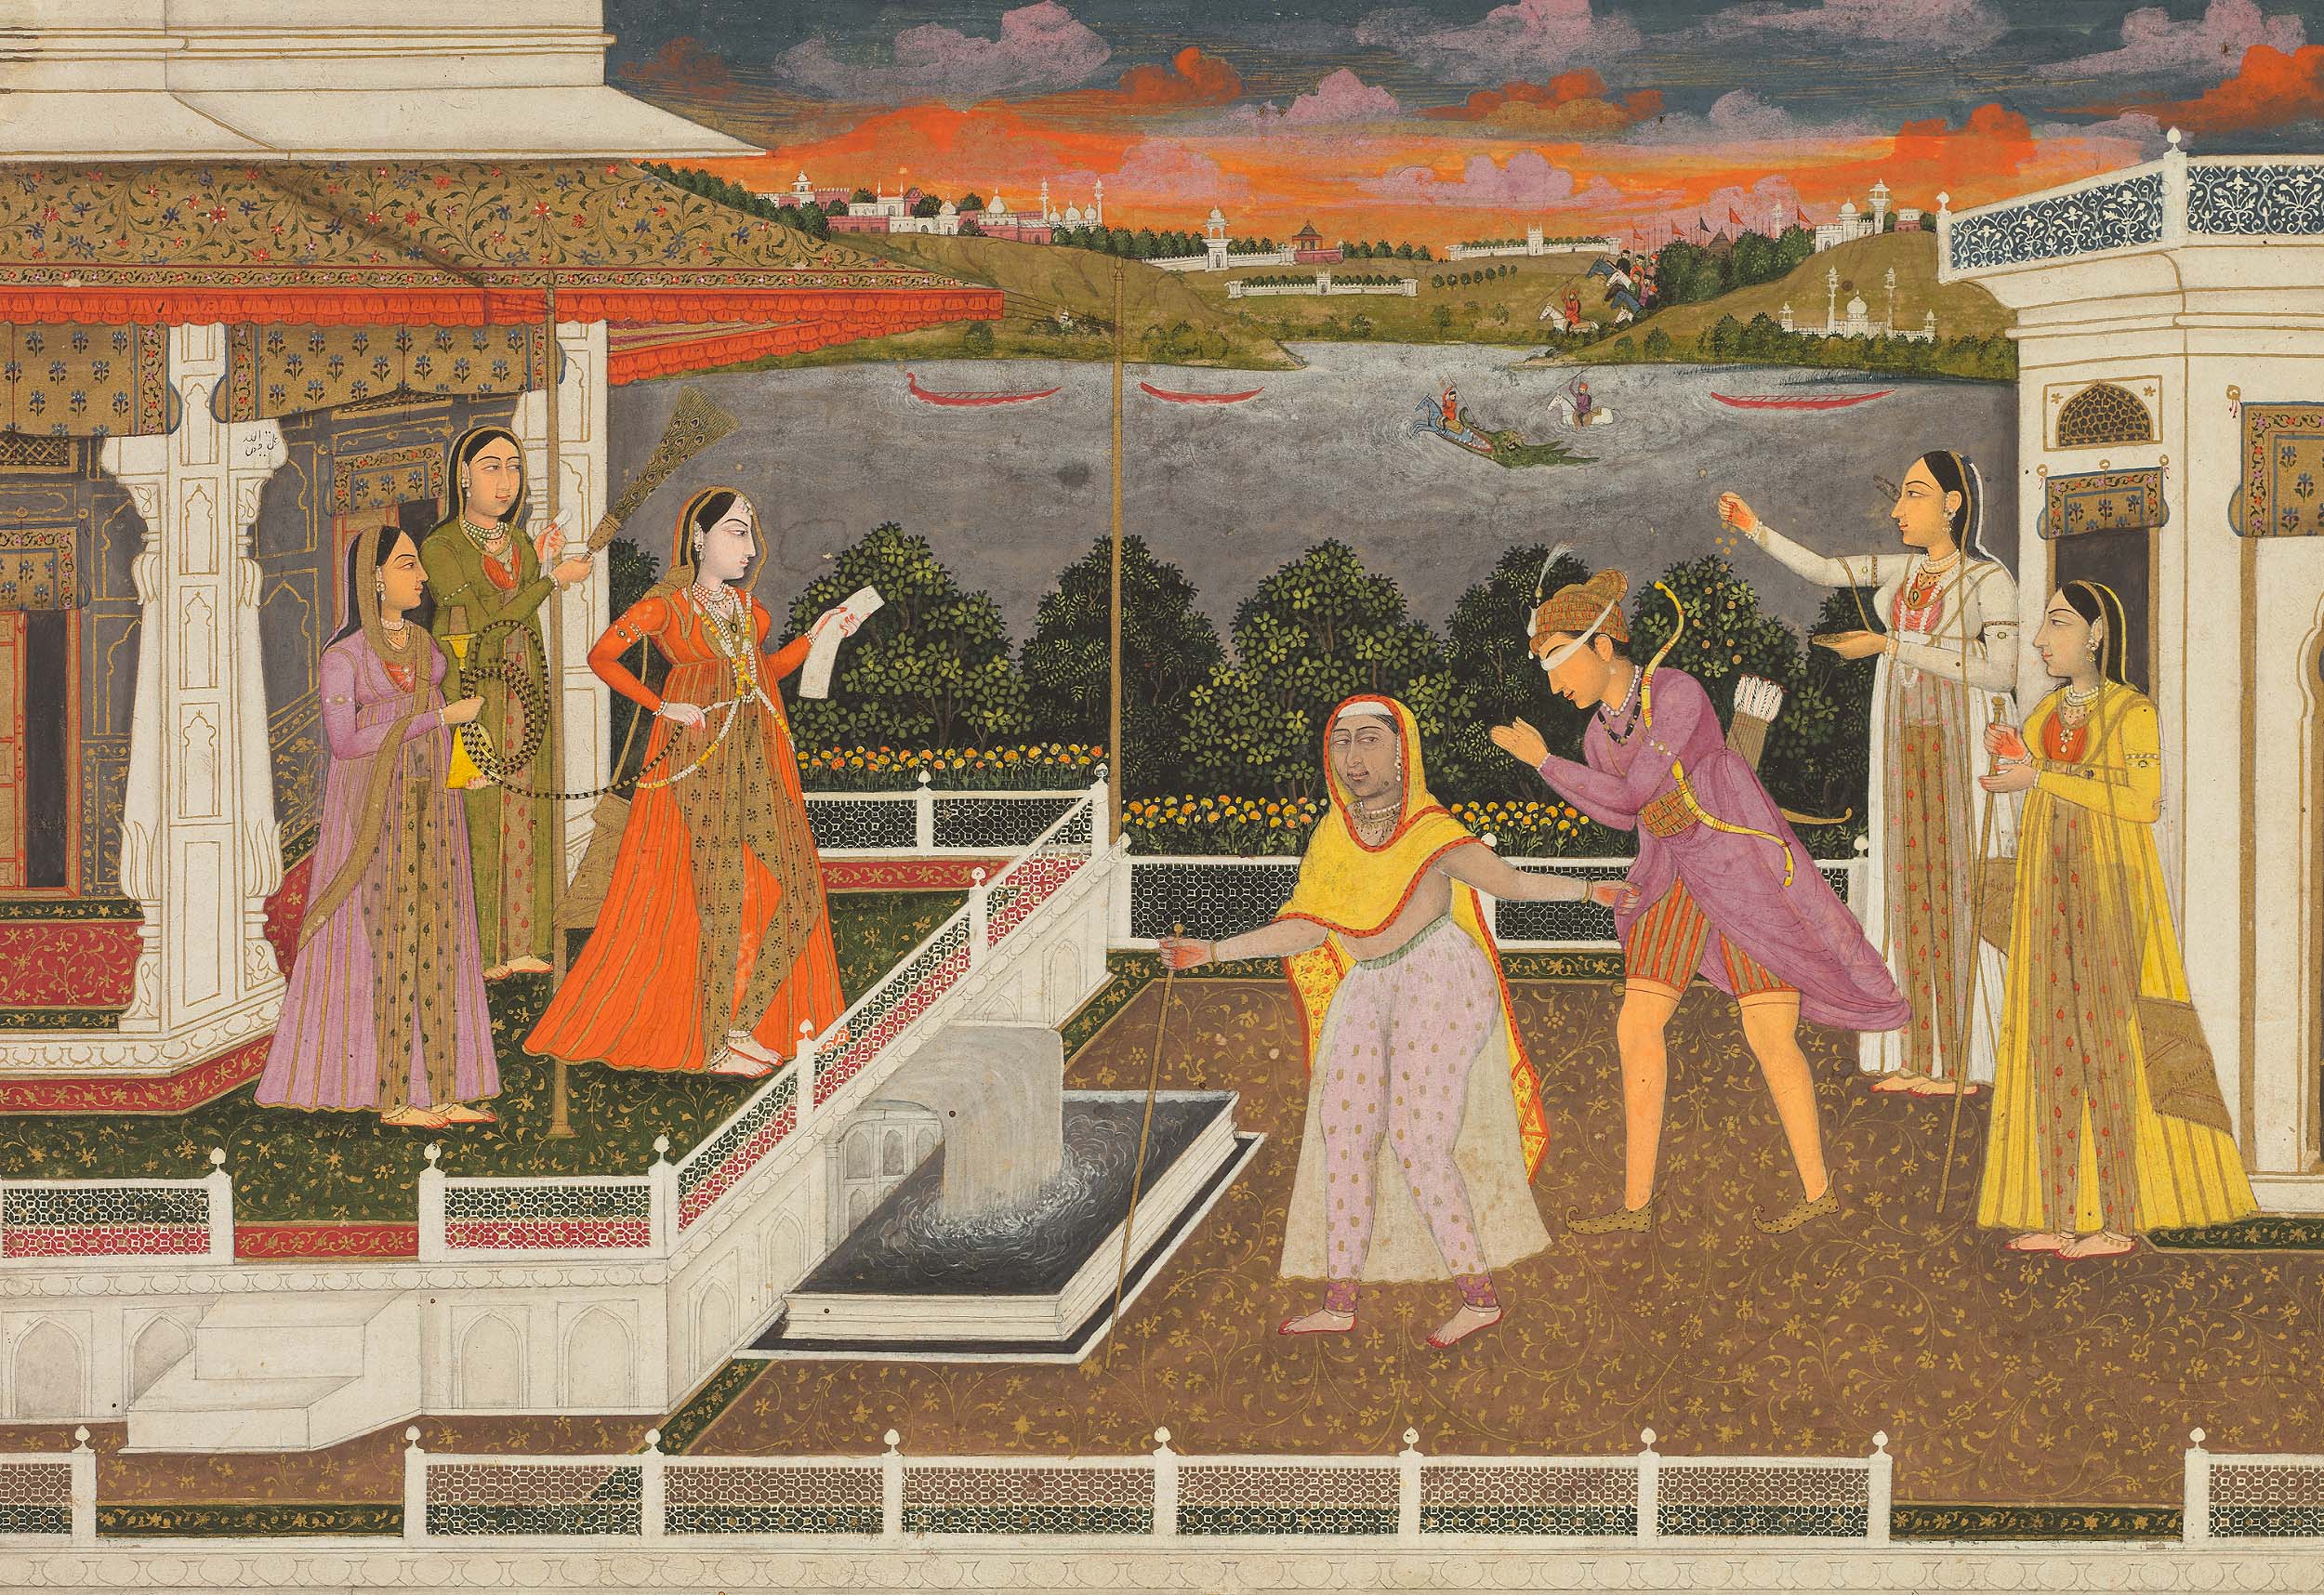 A Mughal painting with a blindfolded suitor in the centre surrounded by women in the women's palace quarters.